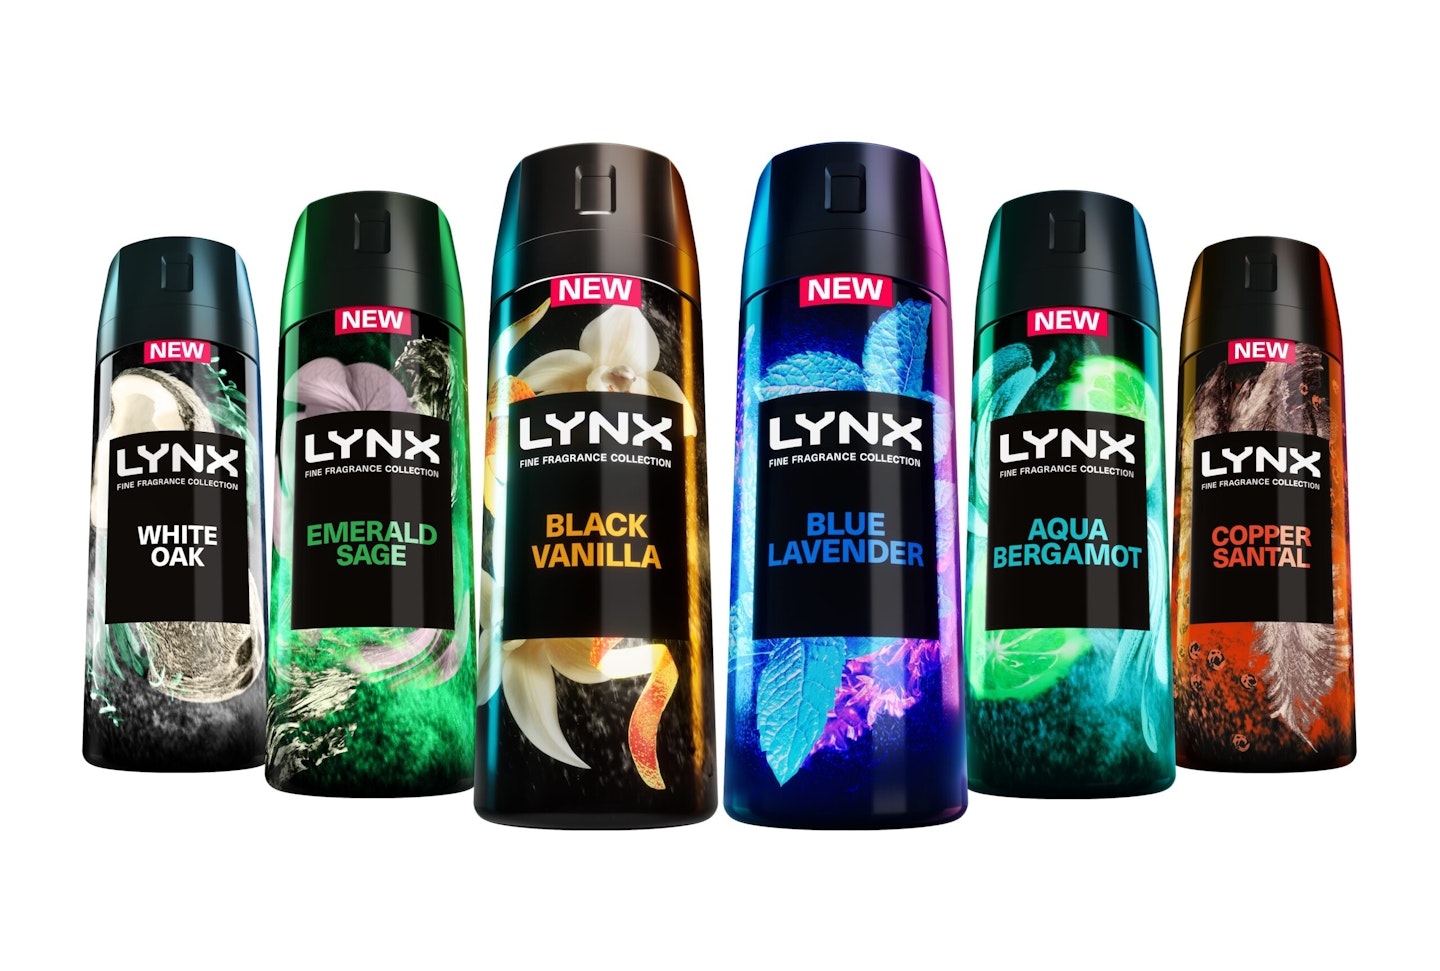 Lynx's new Fine Fragrance Collection